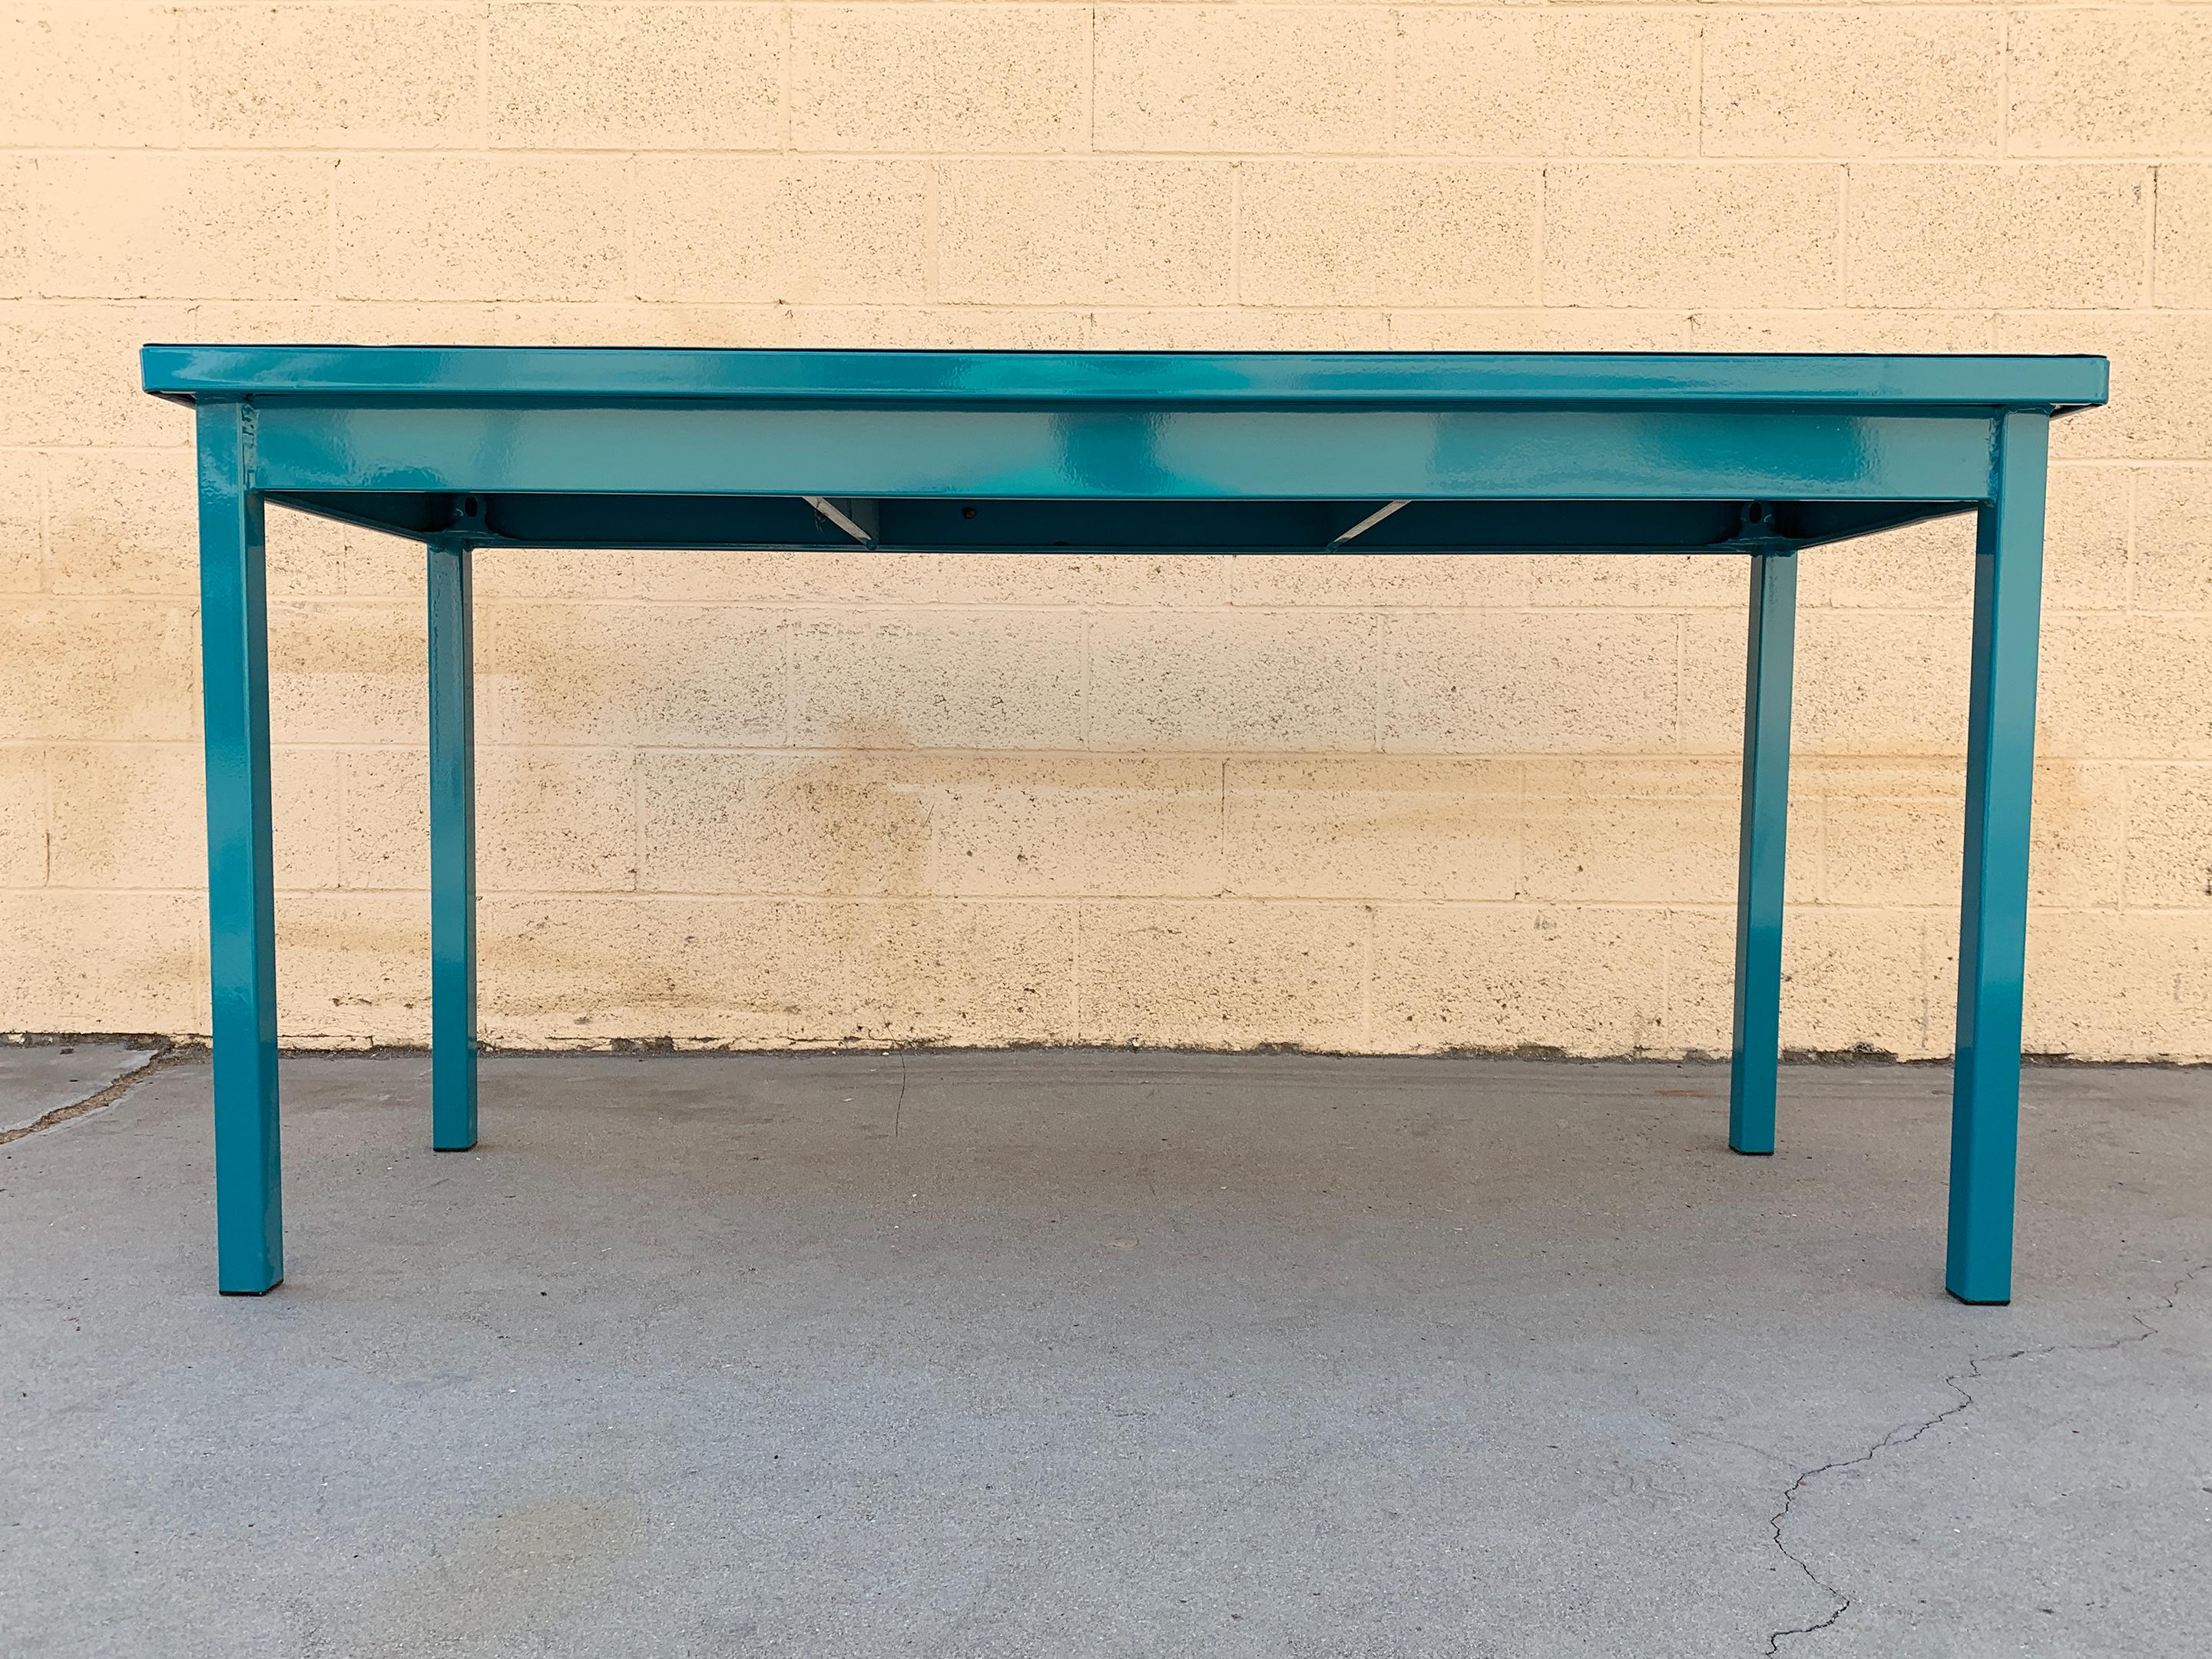 Midcentury 4-legged tanker table refinished in a pop of teal (RAL 5021). This table is narrower and wider than most tankers; at 24